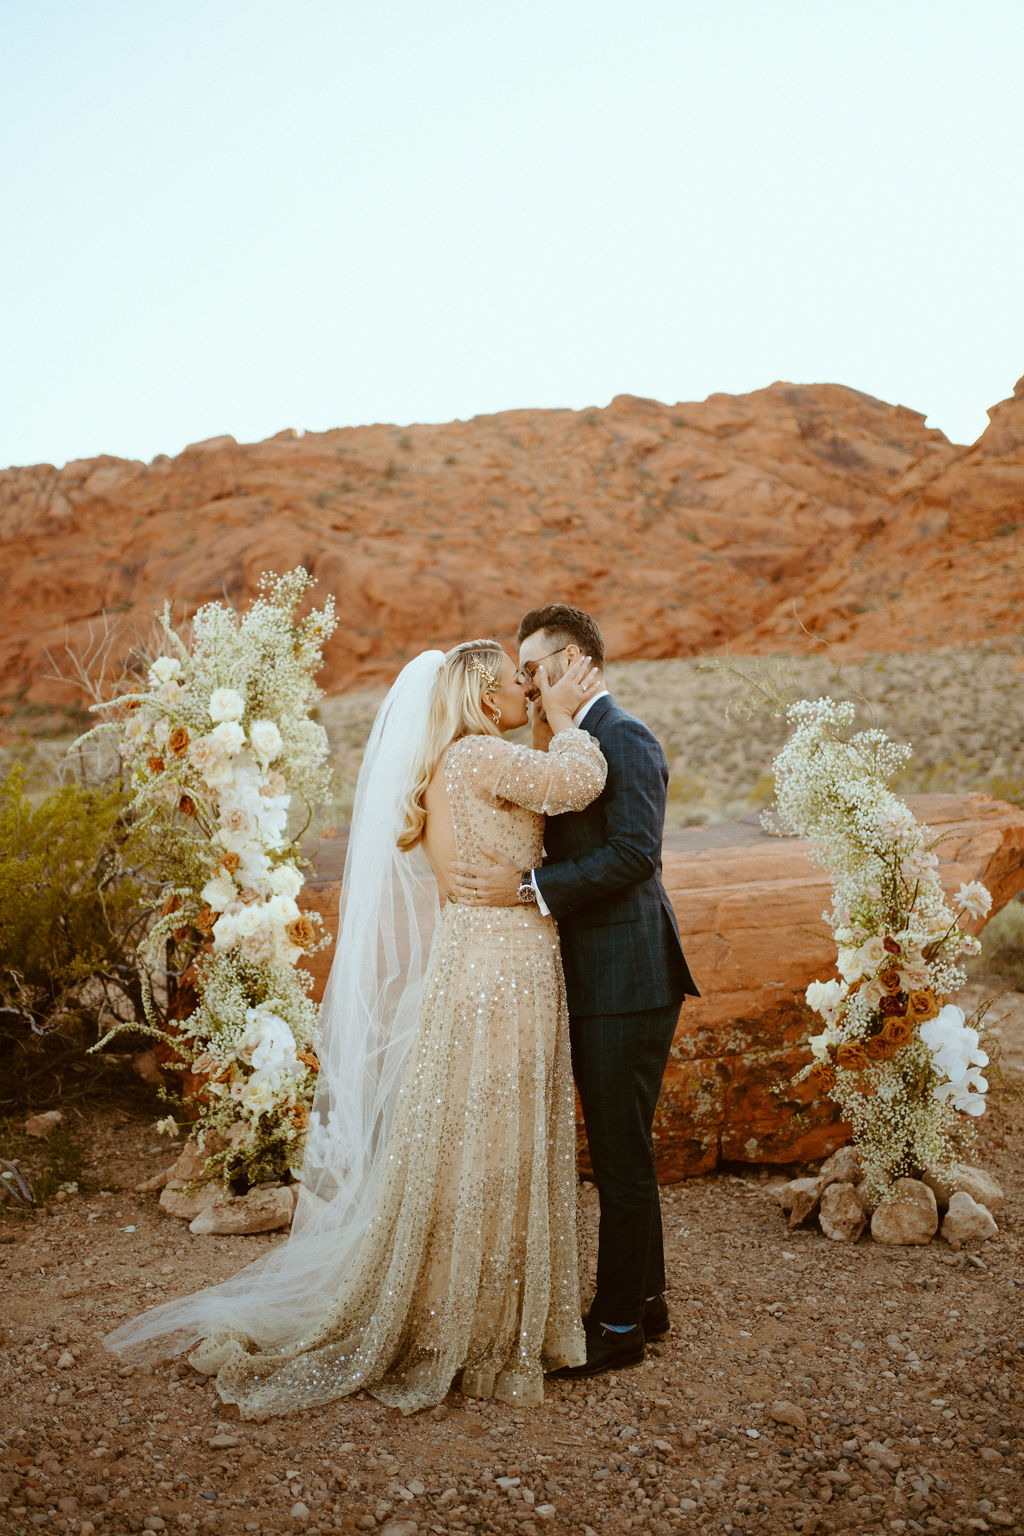 Micro-Wedding Reception at Ash Springs. The first kiss as Mr. & Mrs. in between the asymmetrical floral arch in front of the red sandstone rocks.